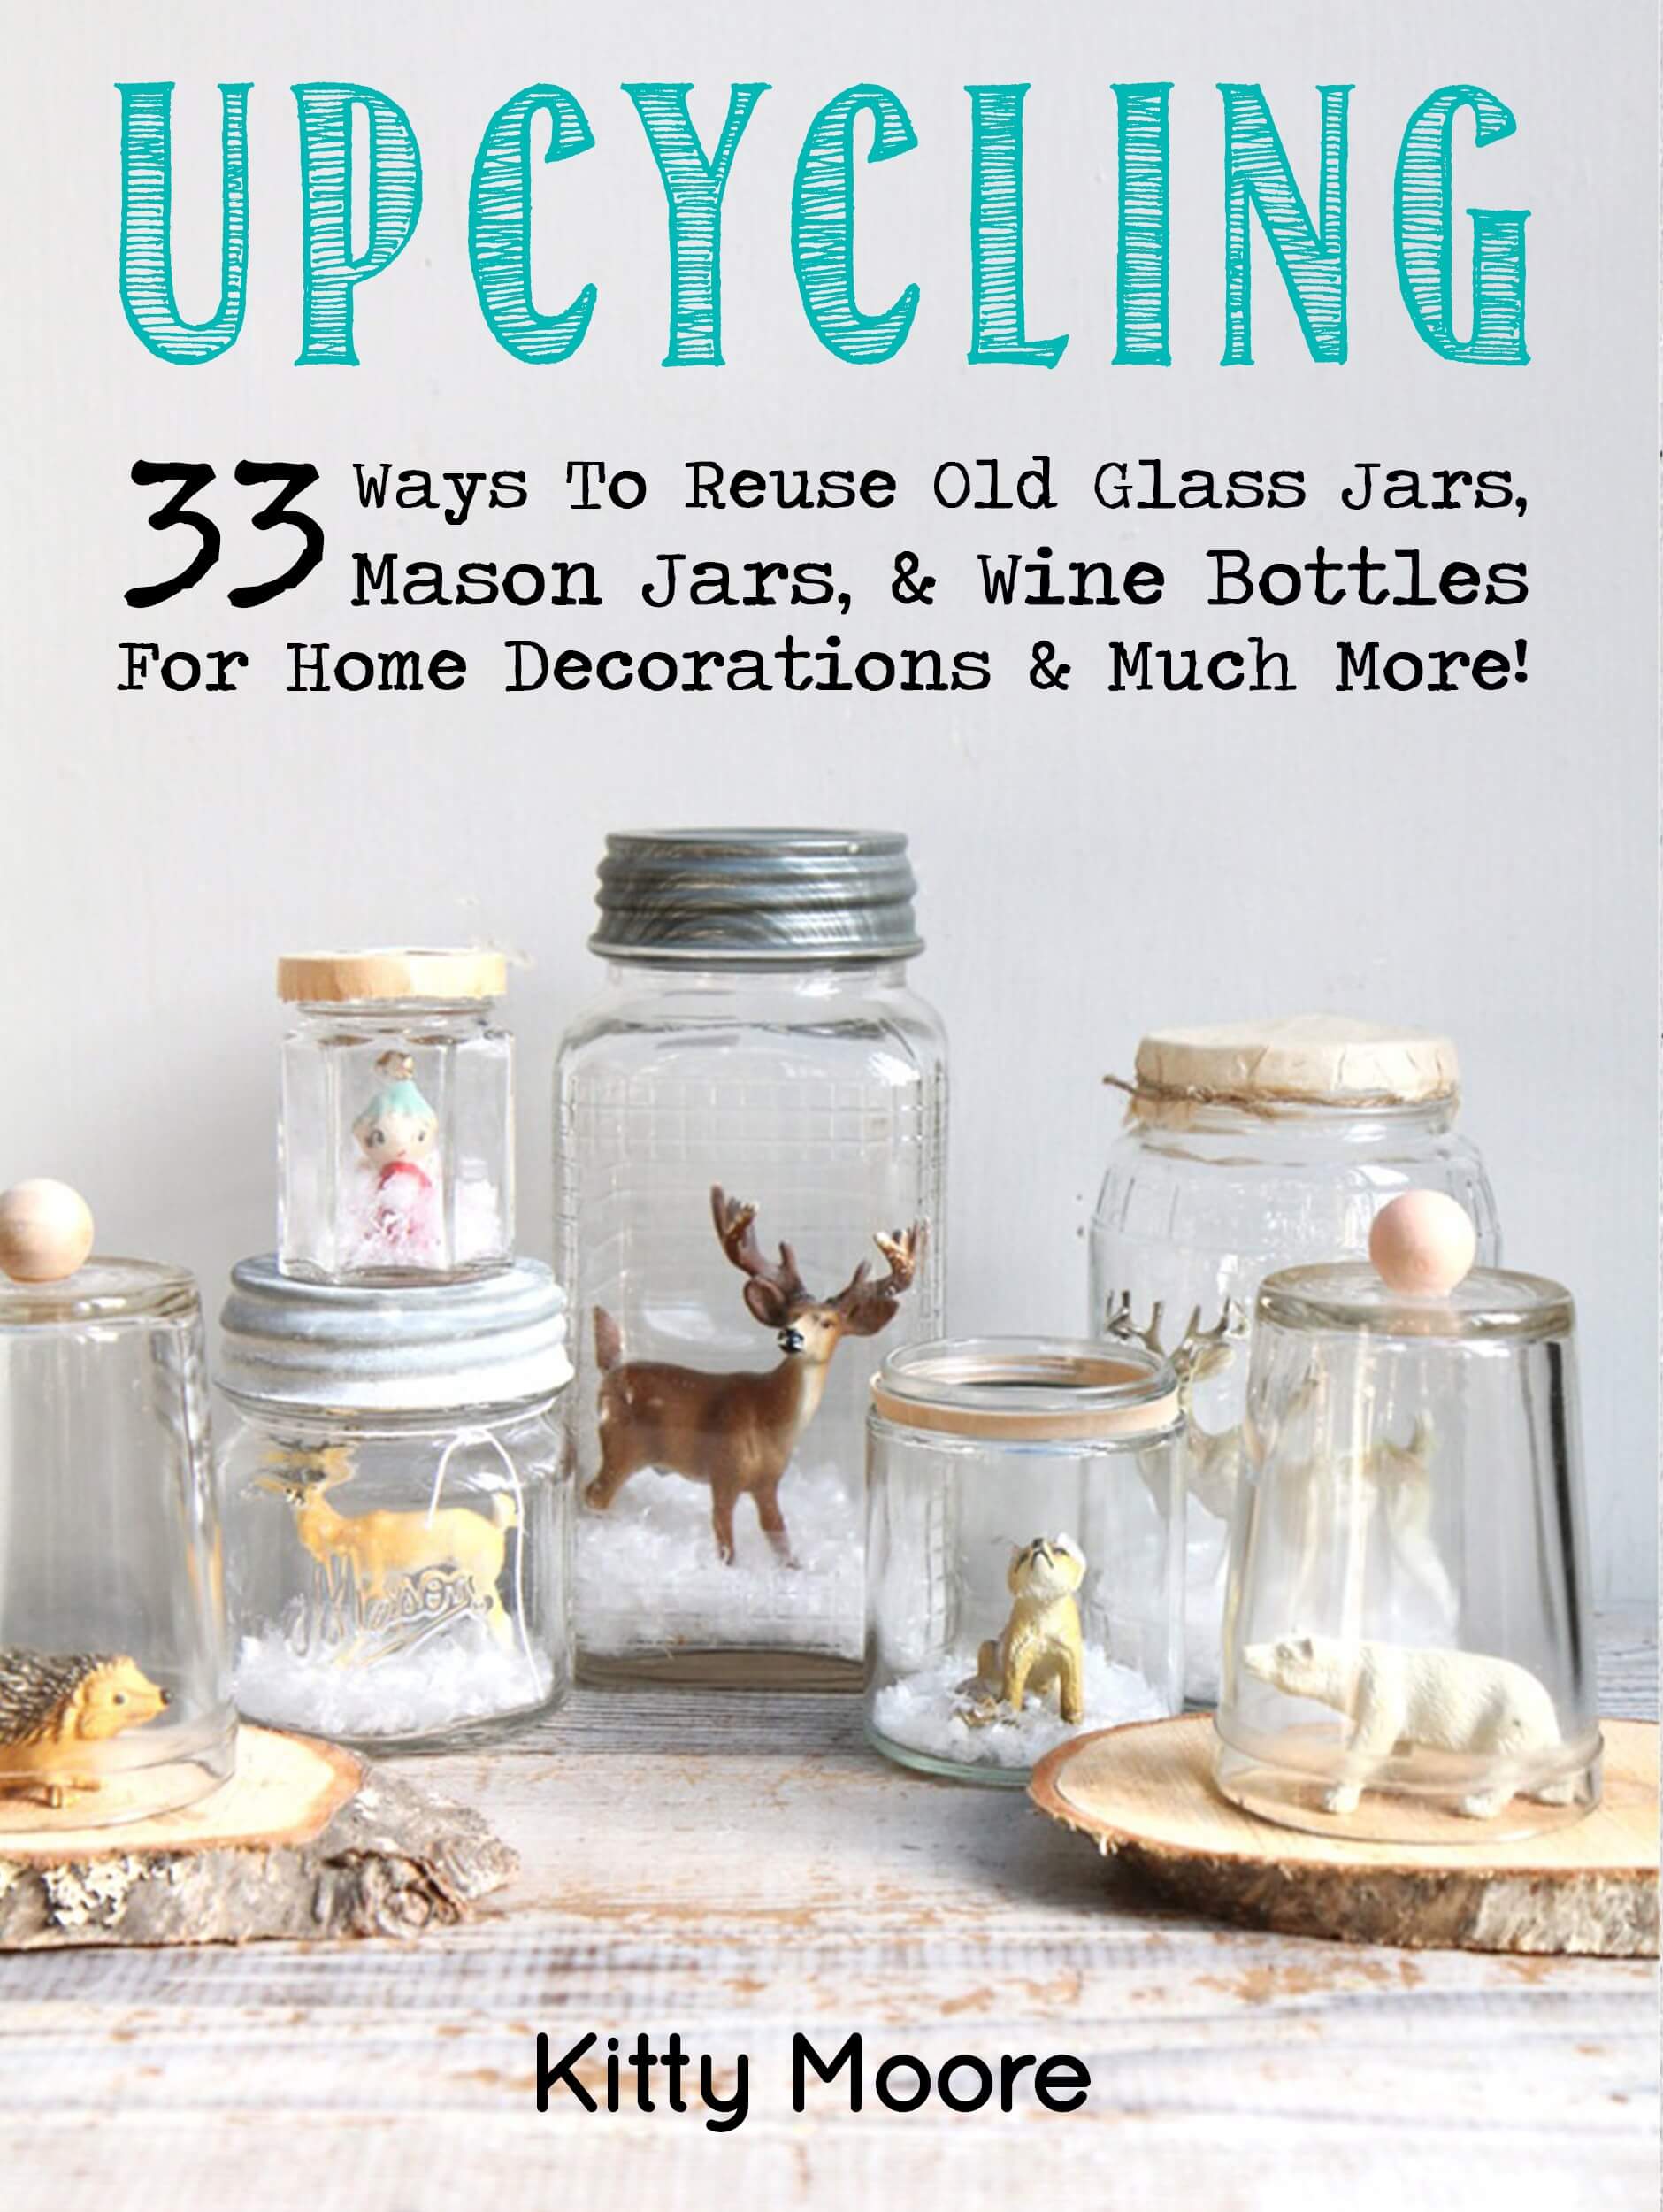 FREE: Upcycling: 33 Ways To Reuse Old Glass Jars, Mason Jars, & Wine Bottles For Home Decorations & Much More! by Kitty Moore